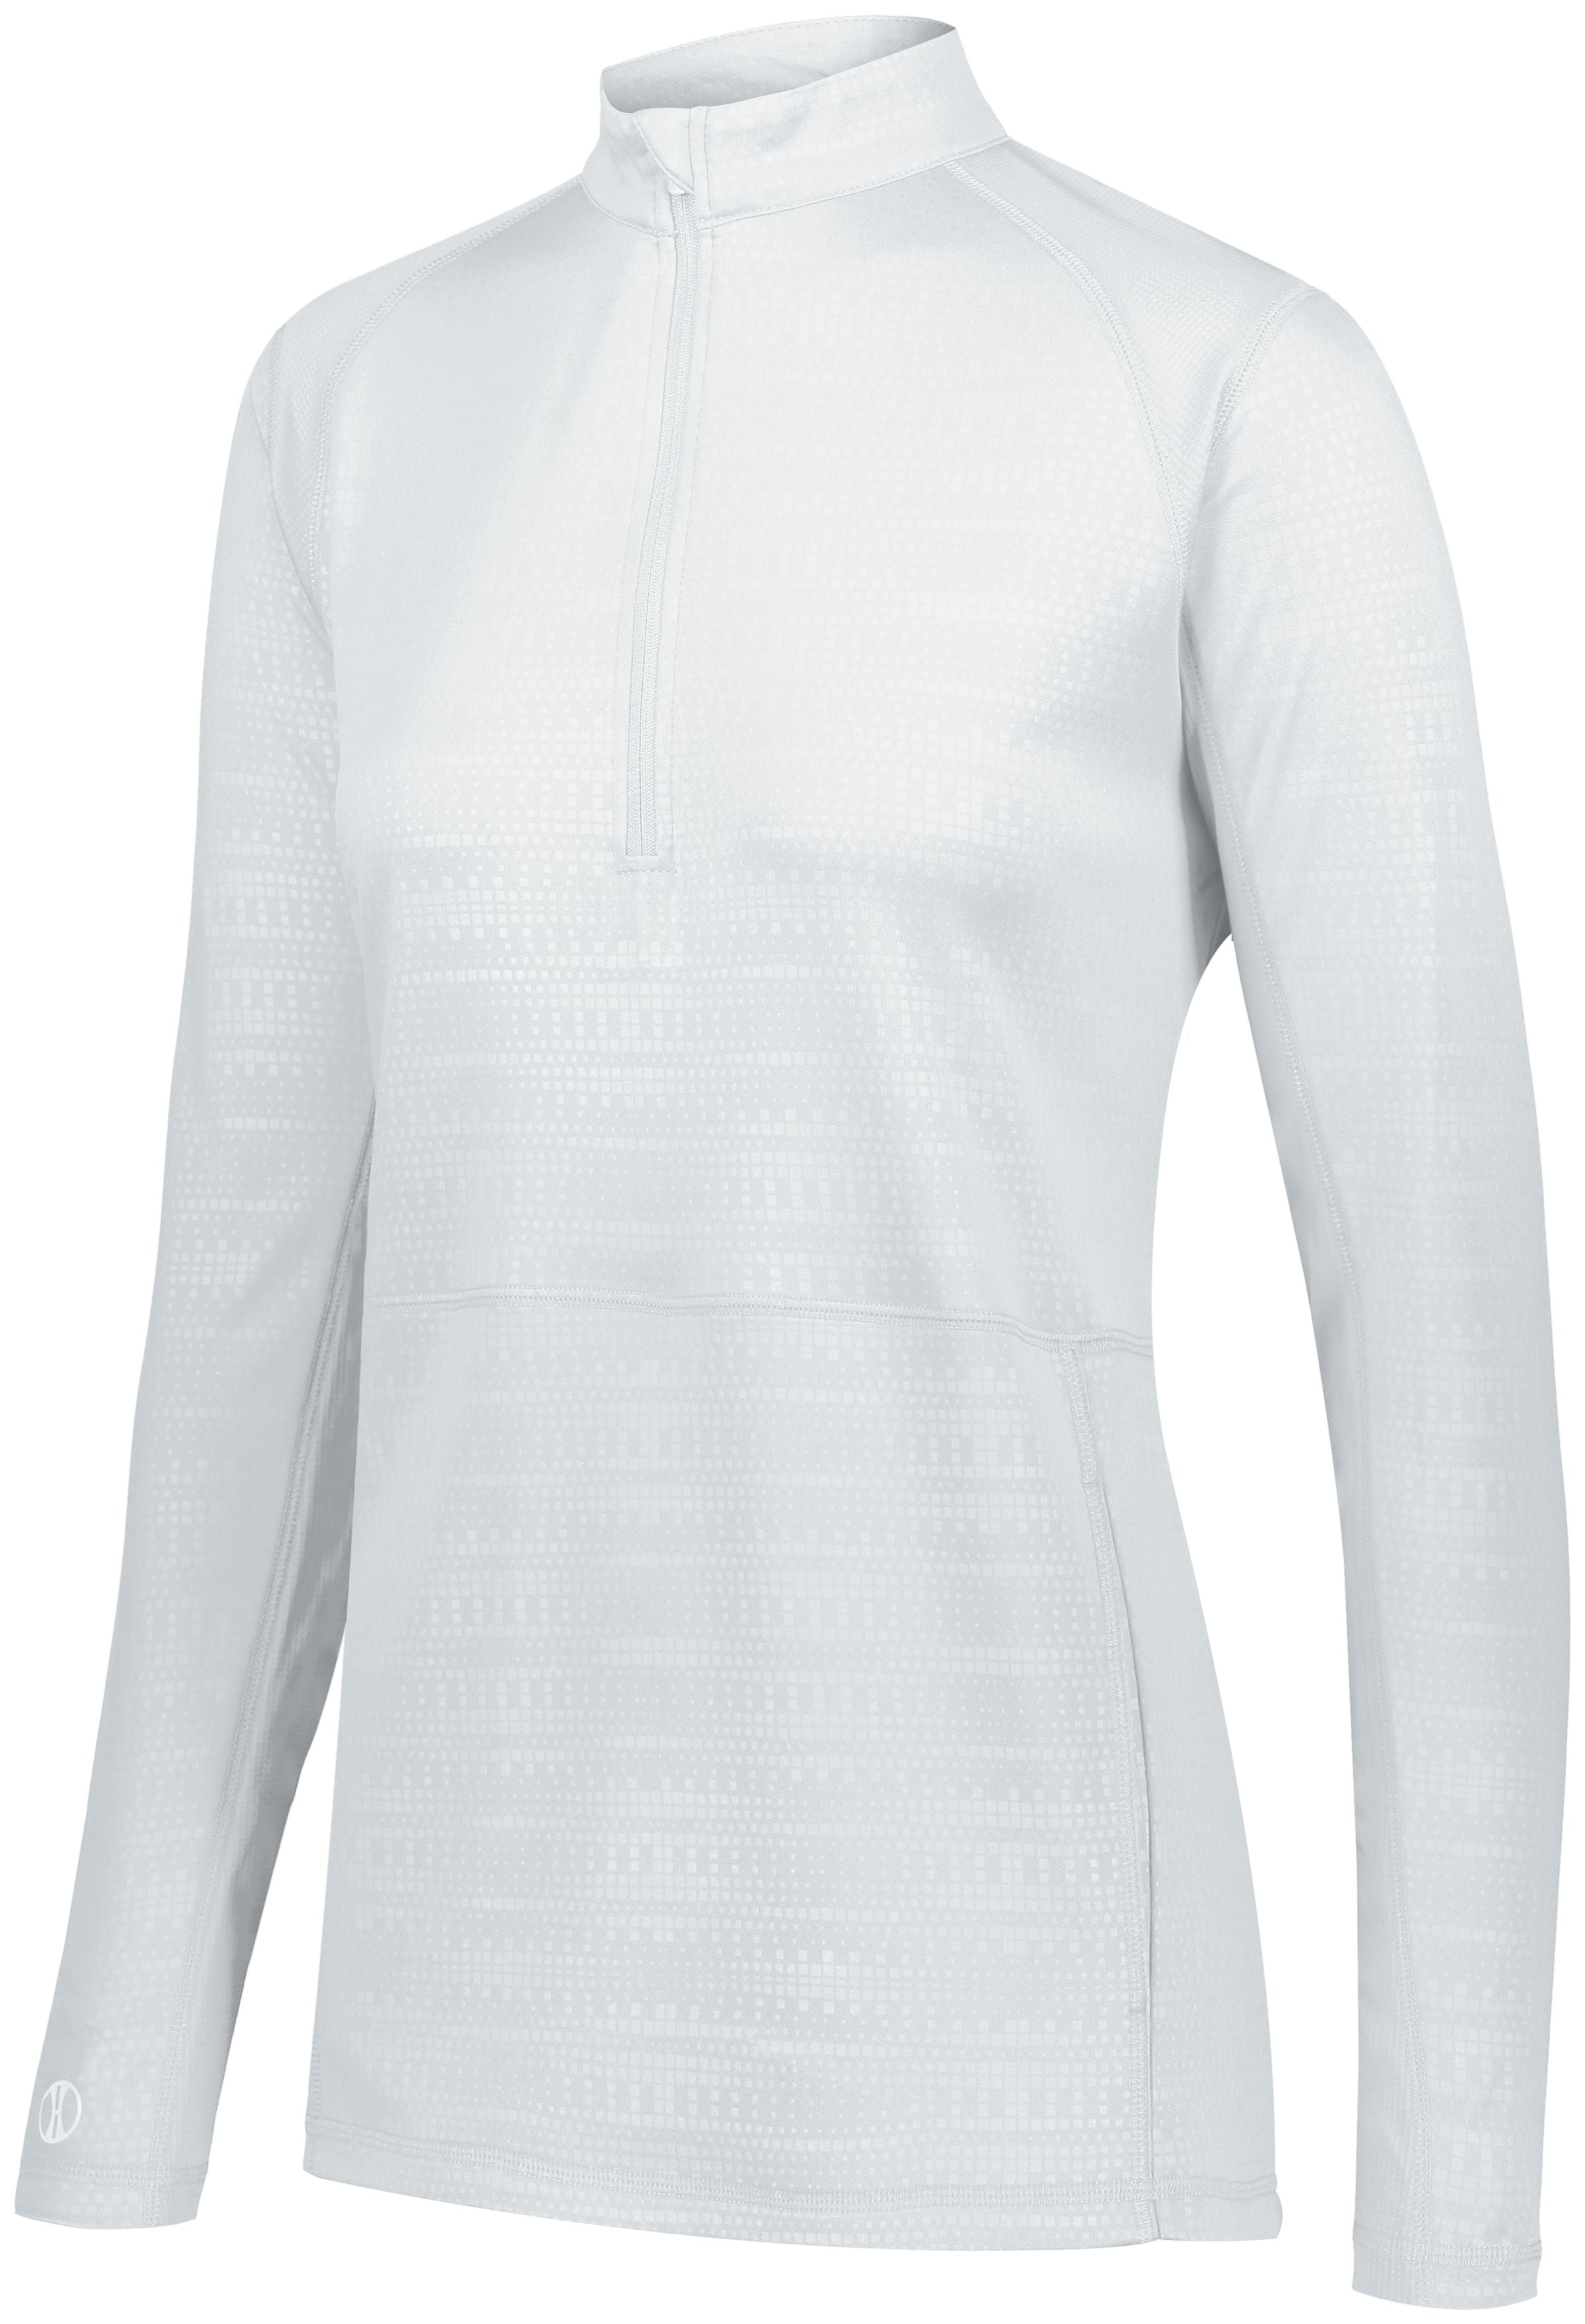 Holloway Ladies Converge 1/2 Zip Pullover in White  -Part of the Ladies, Holloway, Shirts, Corporate-Collection, Converge-Collection product lines at KanaleyCreations.com